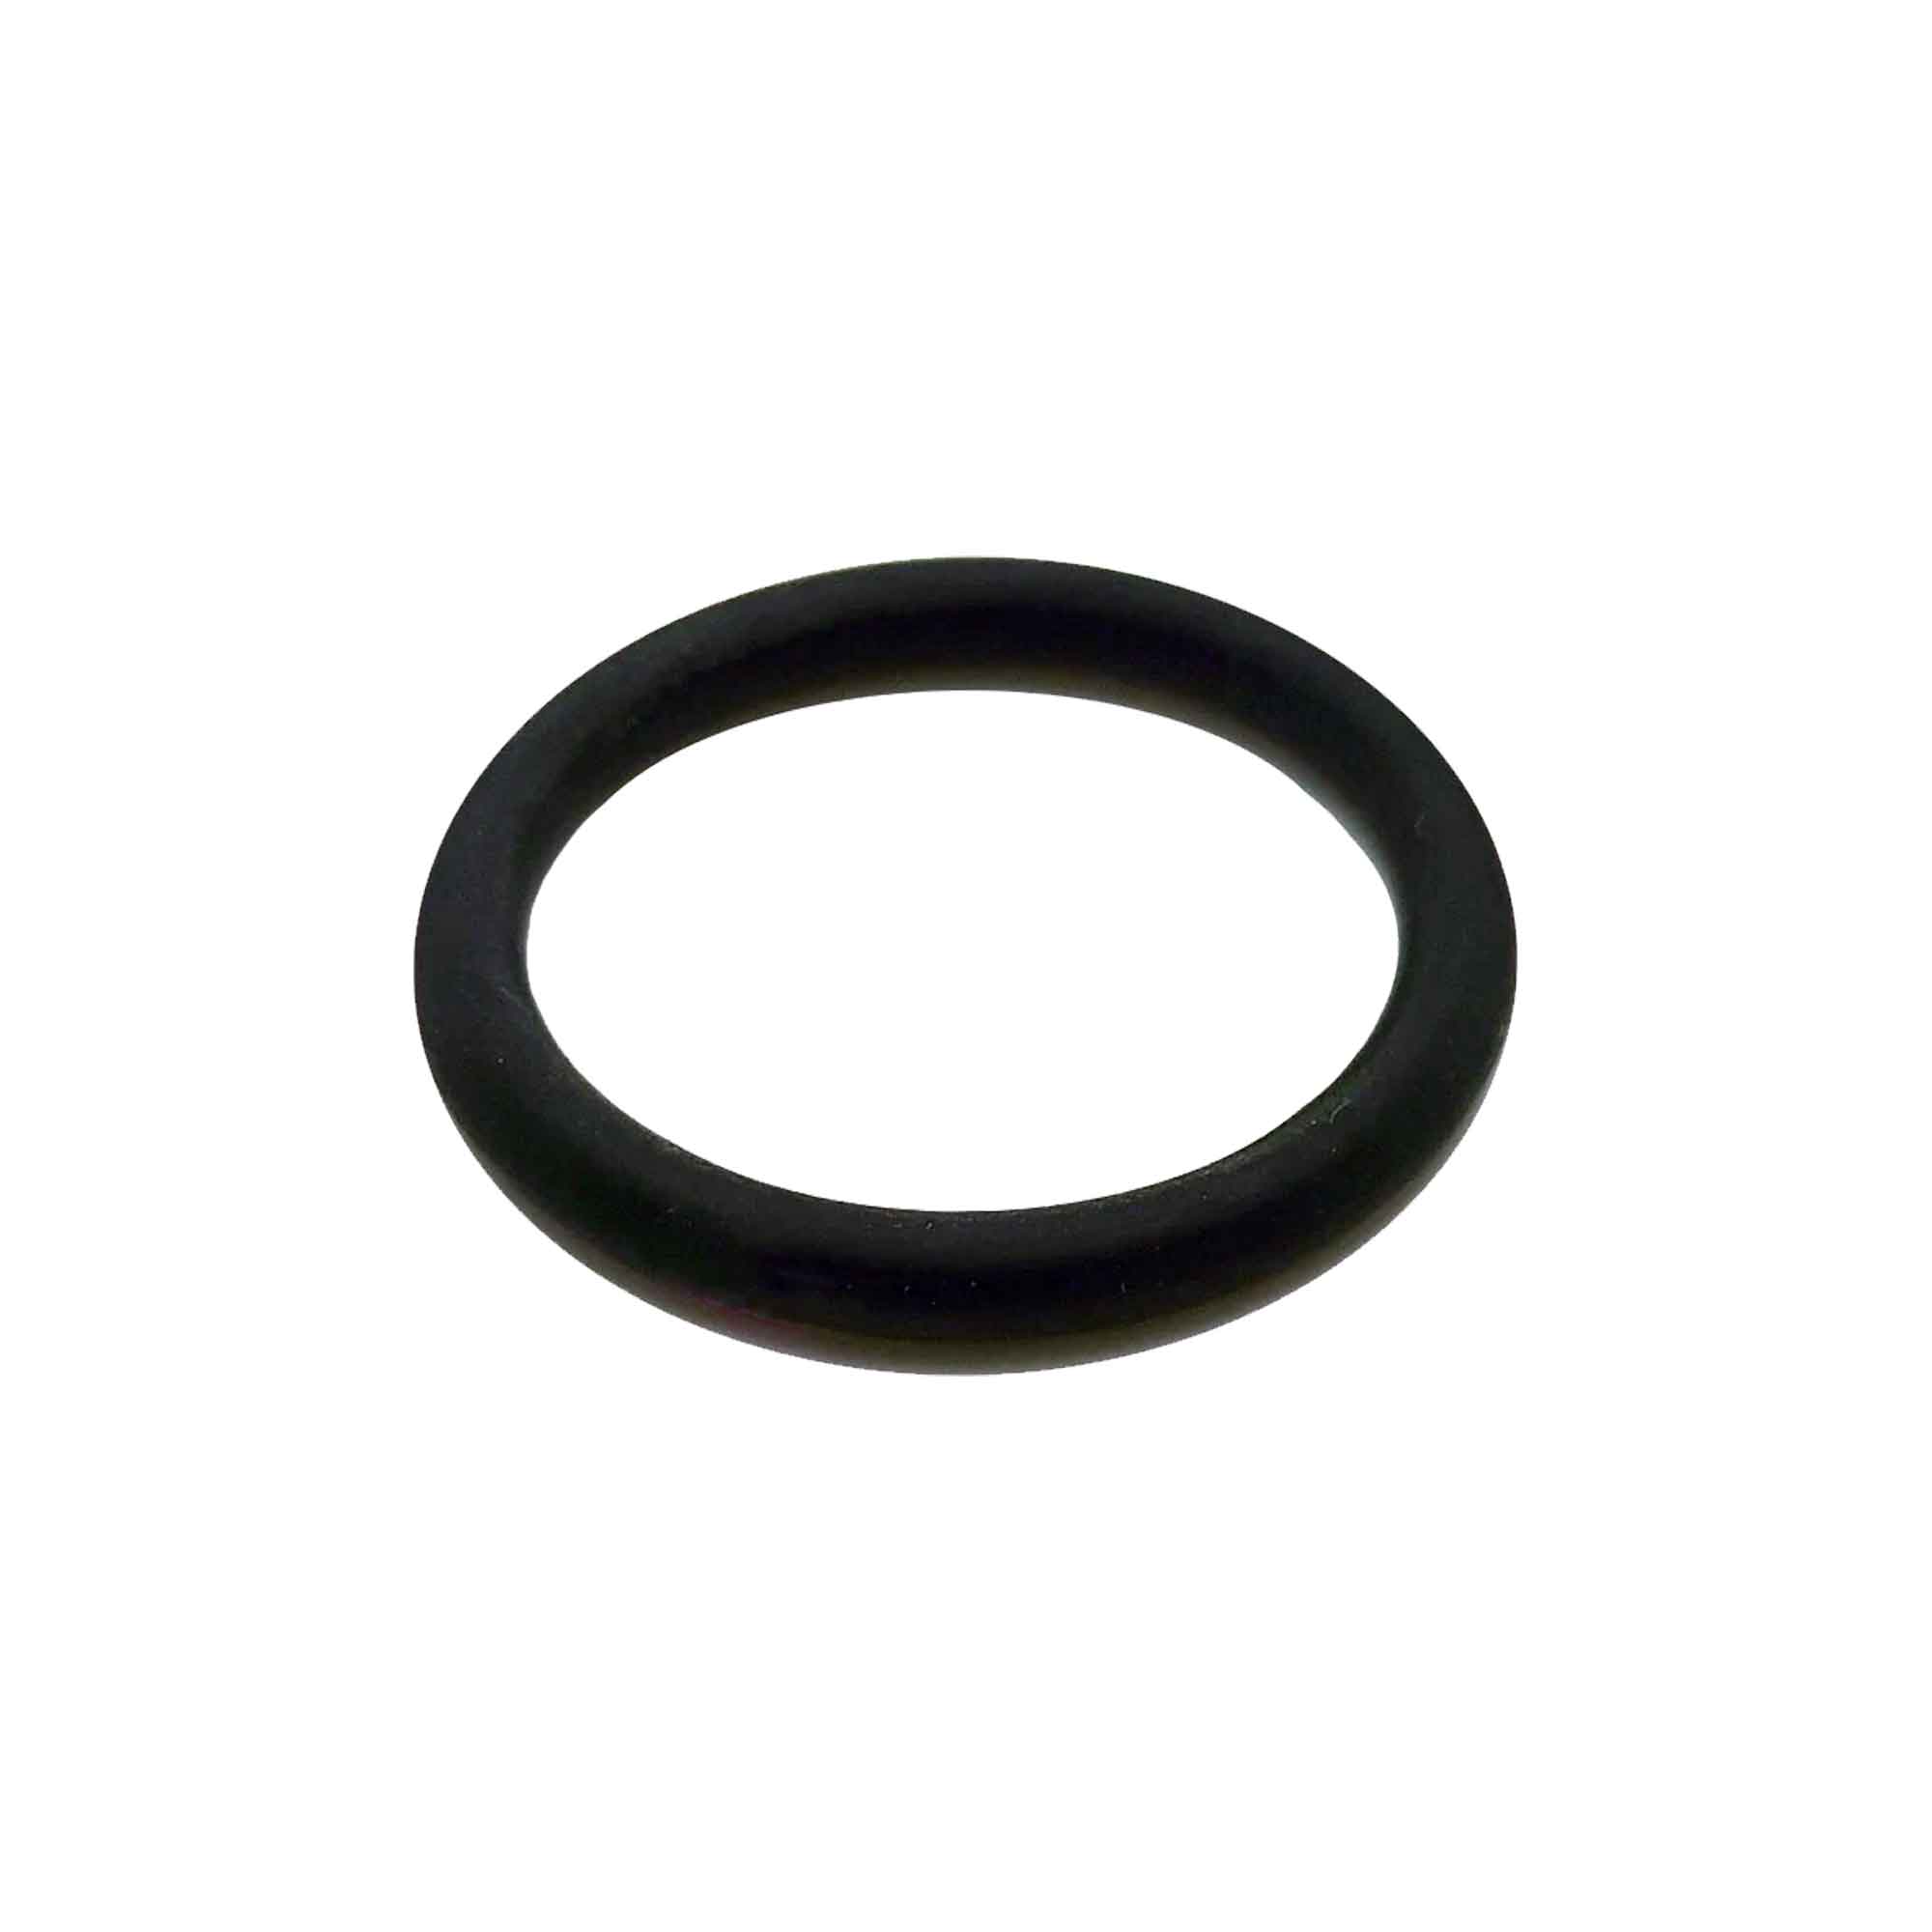 257426 - O-Ring, Pack of 6 - PURspray